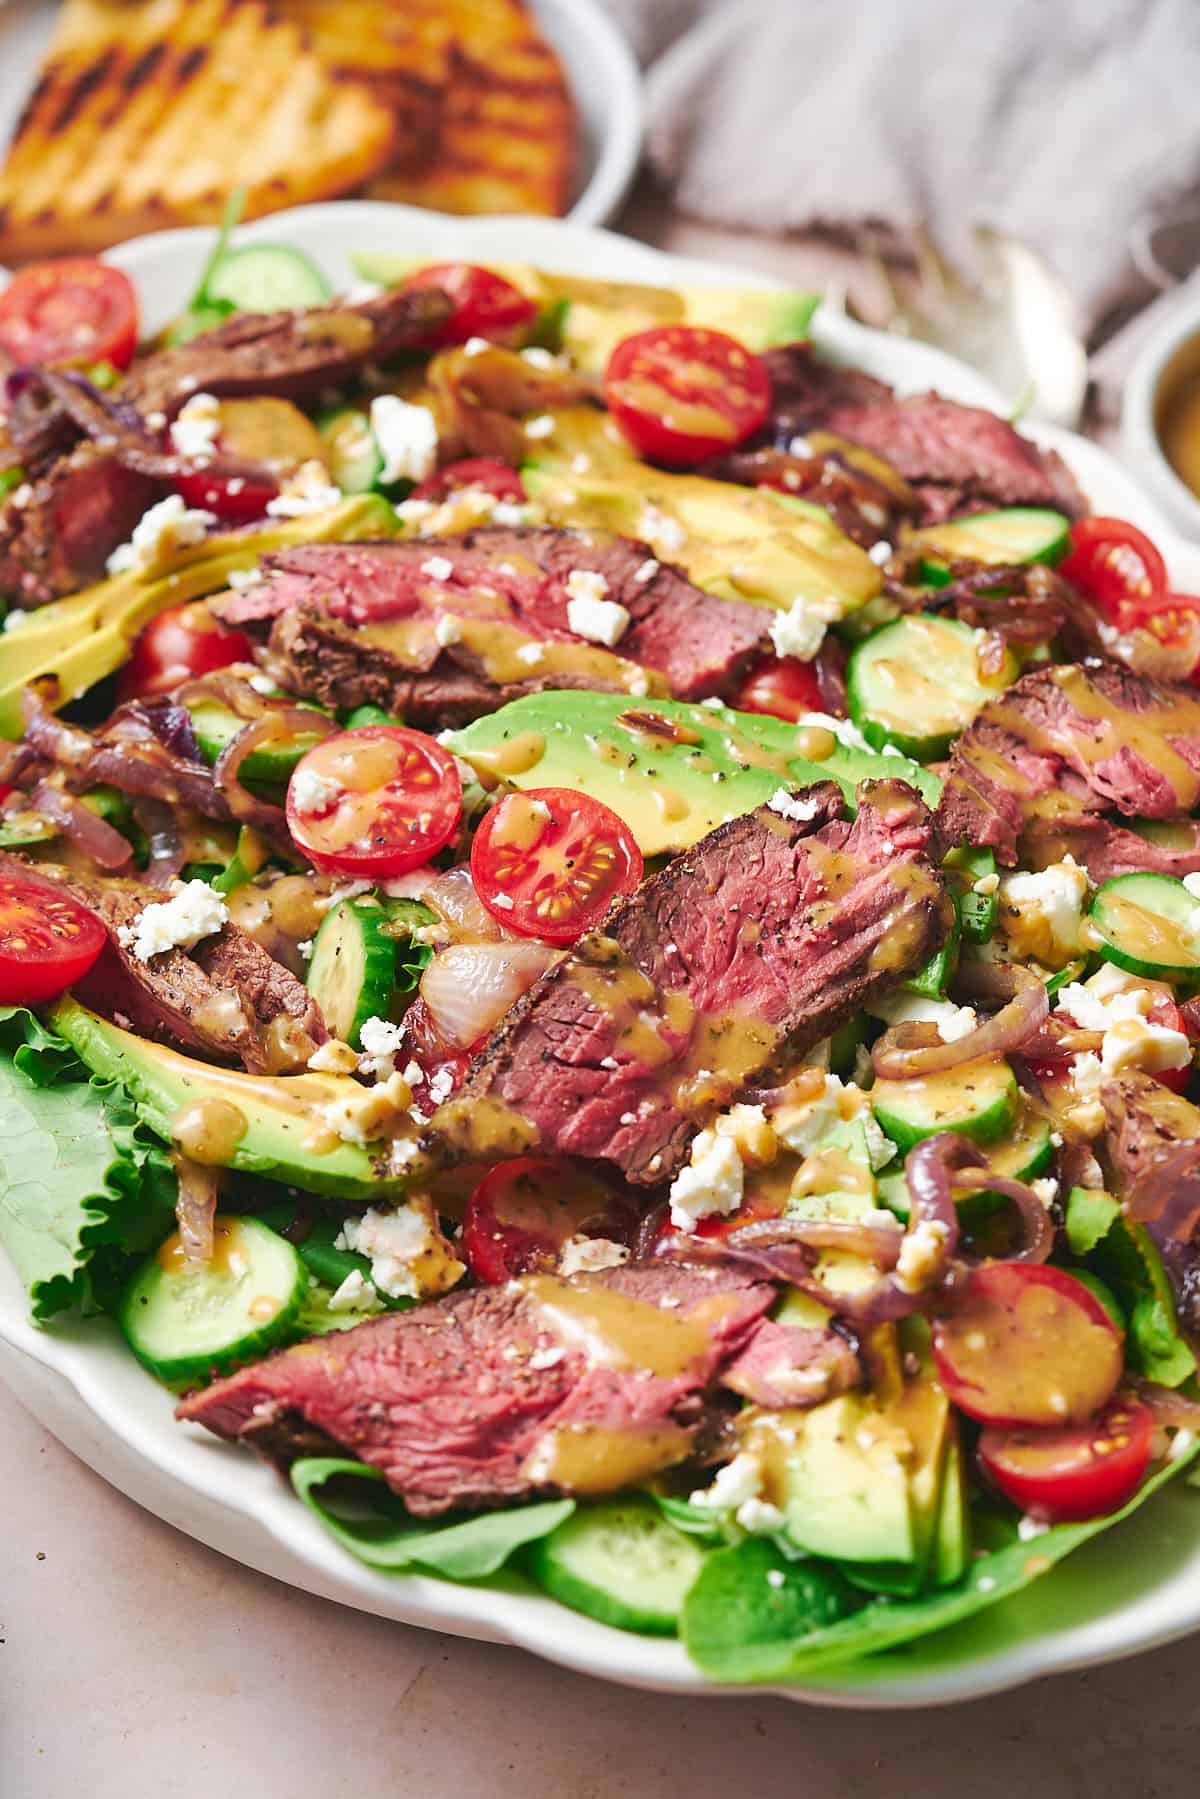 45-degree photo of a steak salad on a ruffled serving plate with avocado, tomato, cucumbers, feta, onions, and dressing. 